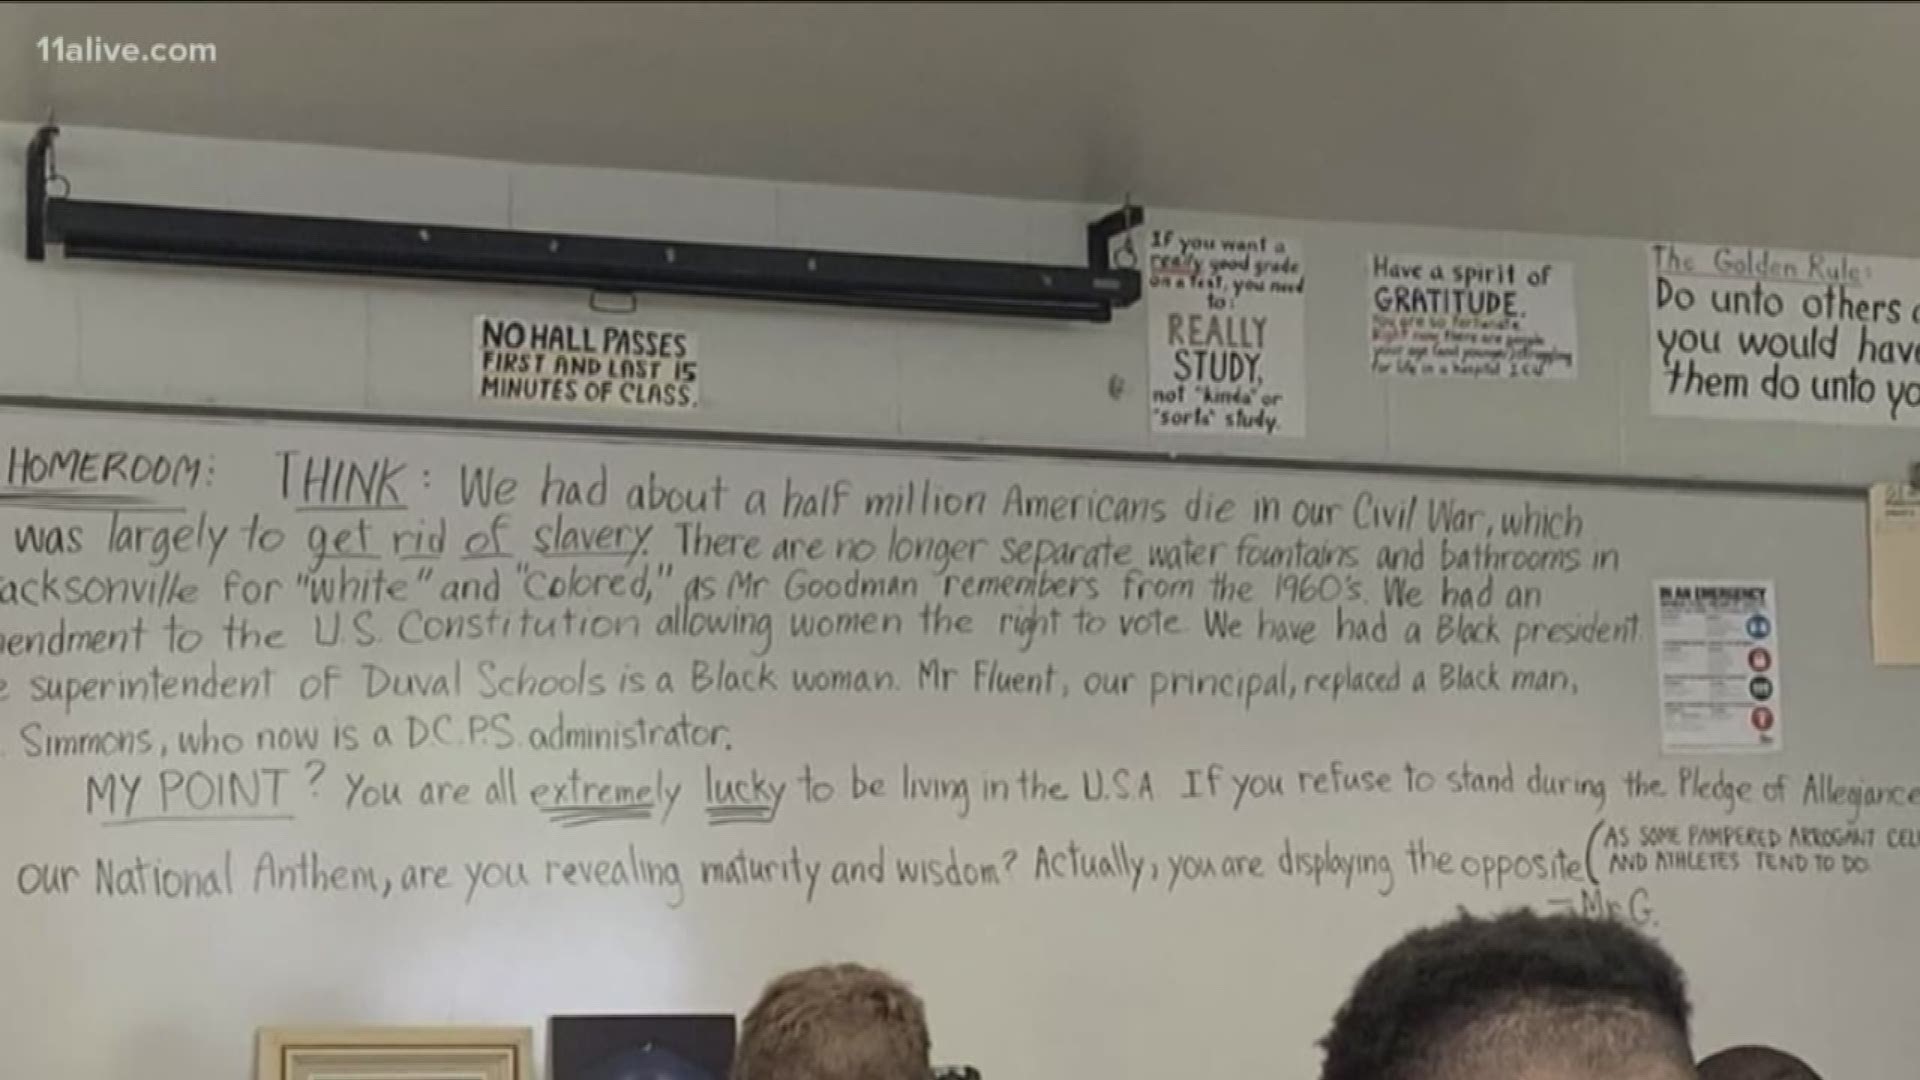 The message chastised students who chose not to stand for the pledge of allegiance, calling them "extremely lucky to be living in the USA."